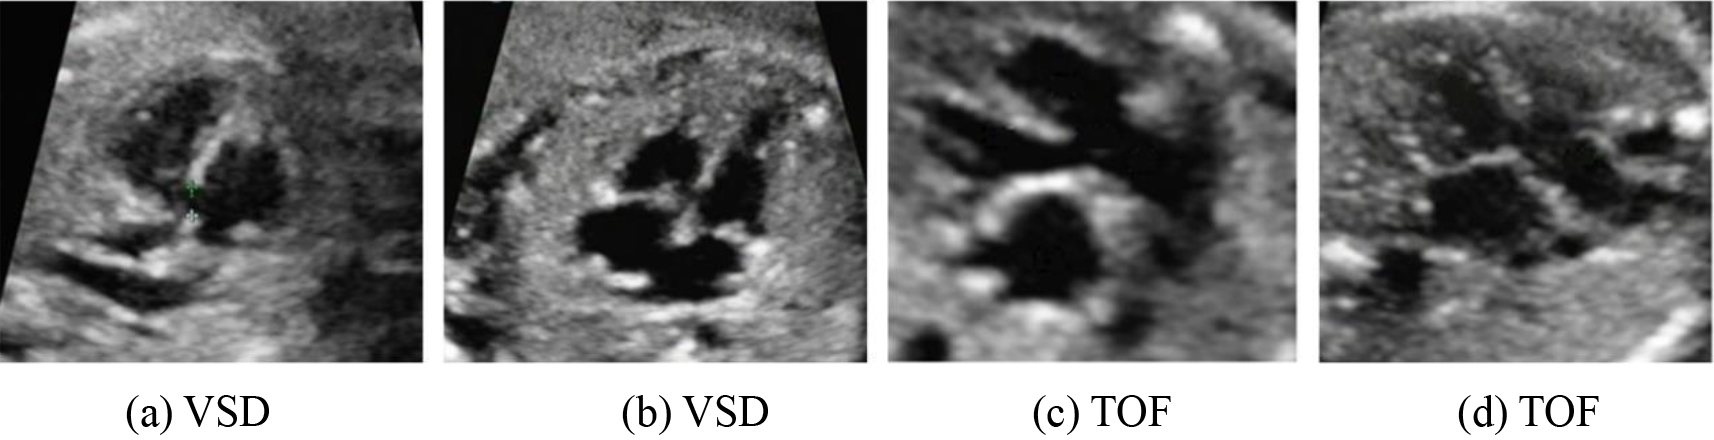 Fetal VSD and TOF images.